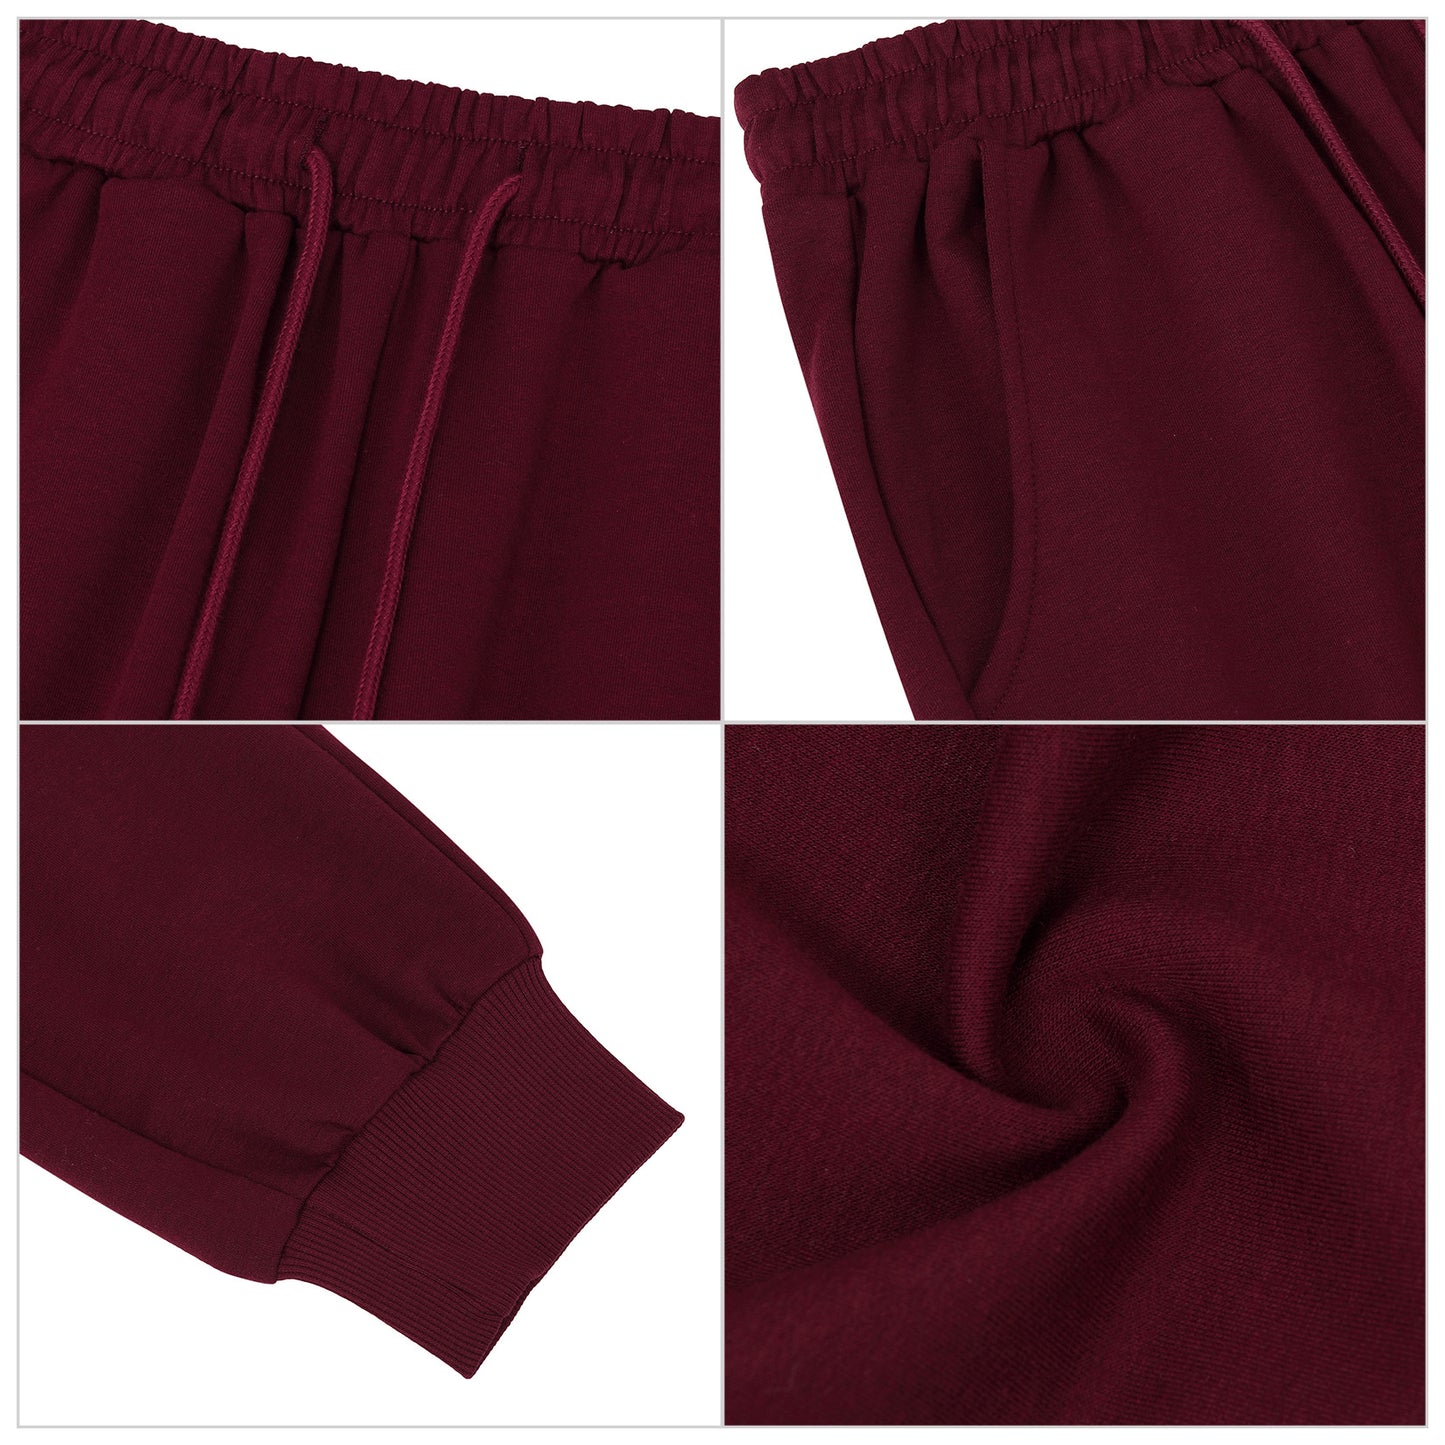 YESFASHION Women's Drawing Pockets Casual Sports Pants Wine Red